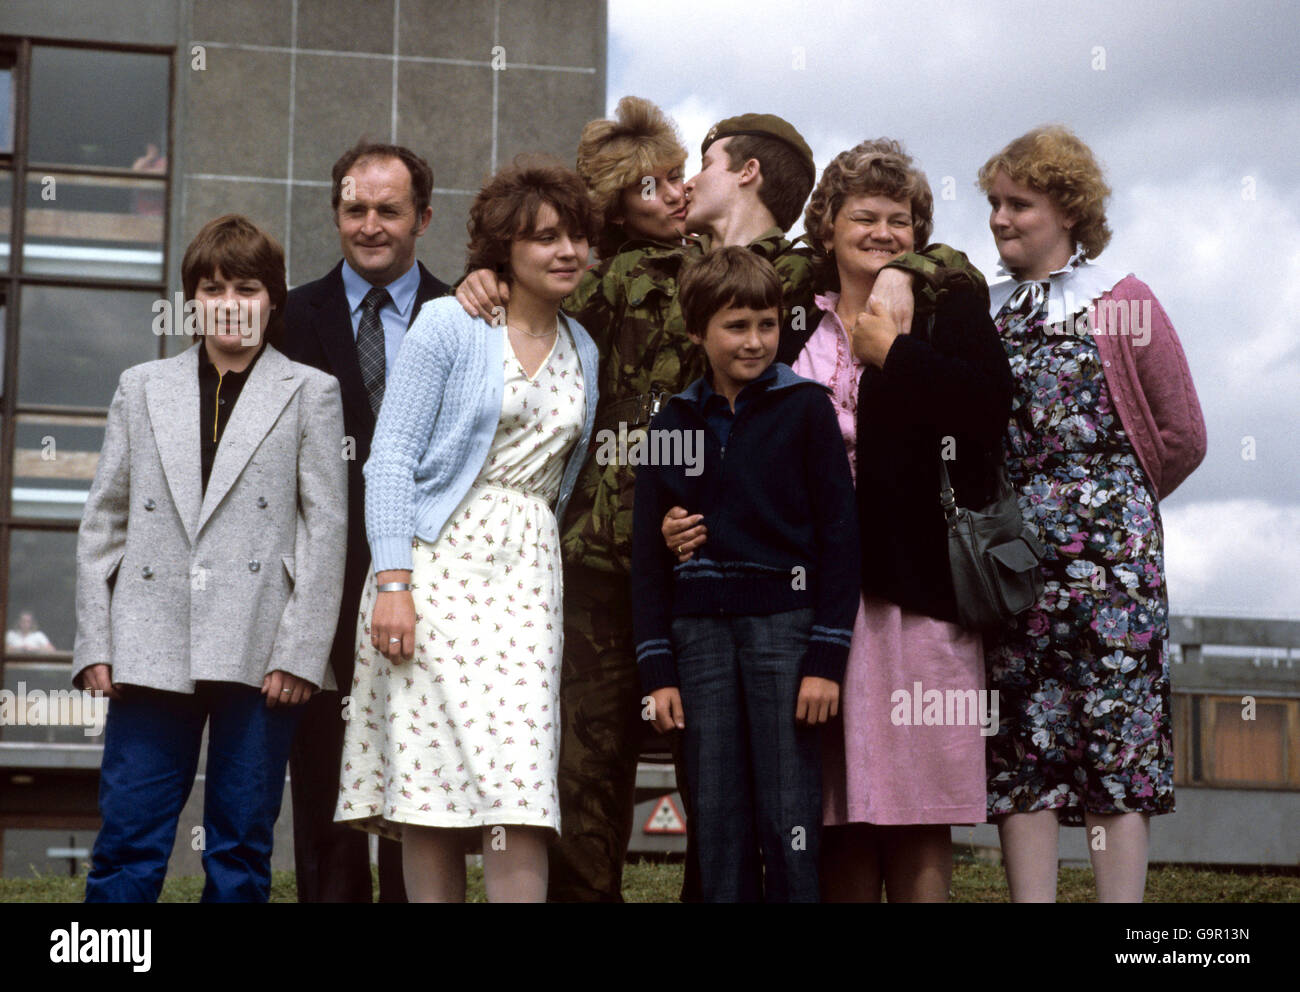 Scots guardsman Philip williams, 18, with his family after he arrived home from the Falklands with the rest of the regiment at Brize Norton today. (L-R) Sister Angela, father Alan, sister Karen, girlfriend Alison Boow, 21, Guardsman Williams, brother Gareth, mother Rosemary and sister Cherith. the family travelled down from Halton, Lancashire, to welcome back Guardsman Williams, who was missing, presumed dead on the Falkands for seven weeks. Stock Photo